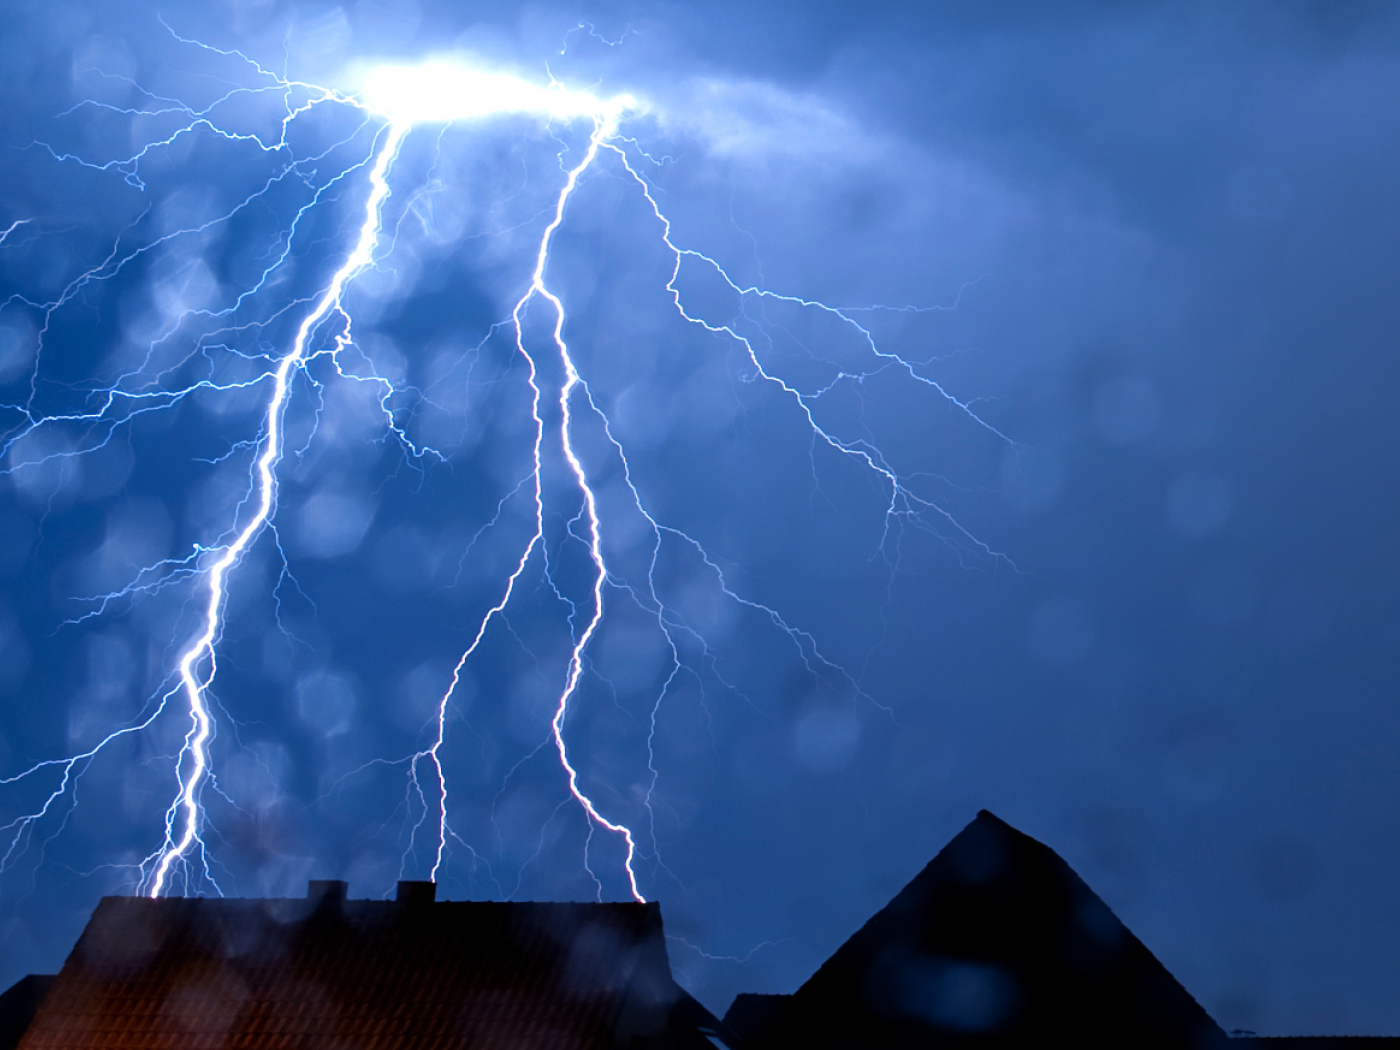 Thunderstorms lead to power cuts in two Graubünden municipalities